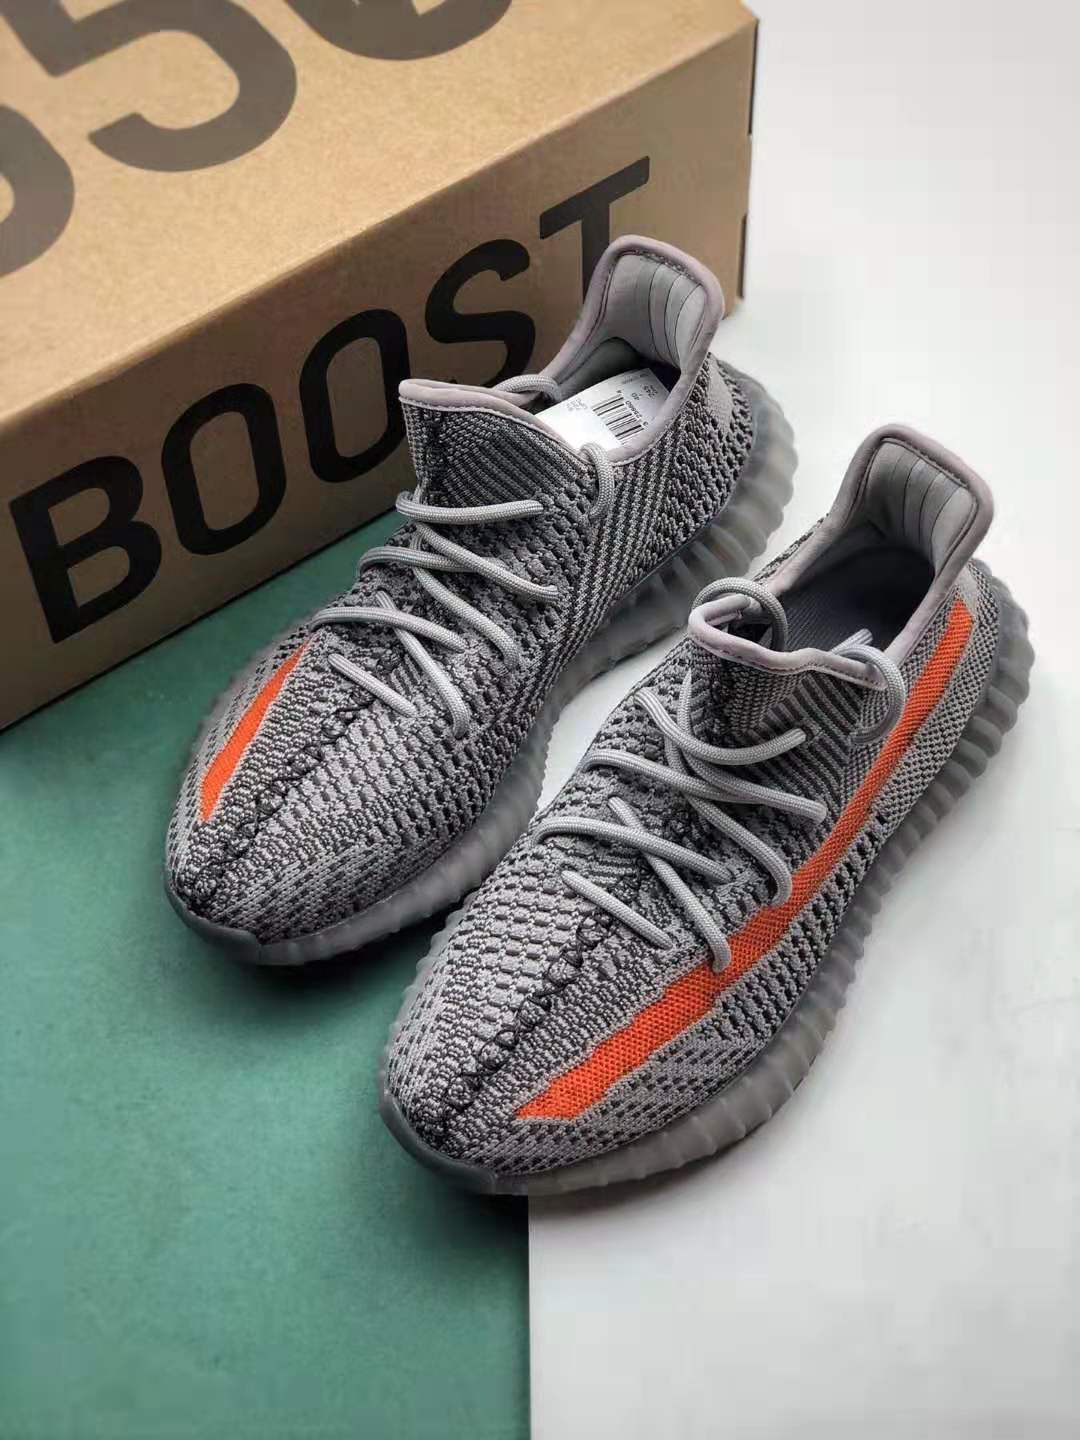 Adidas YEEZY BOOST 350 V3 EF3088 - Trendy and Stylish Sneakers